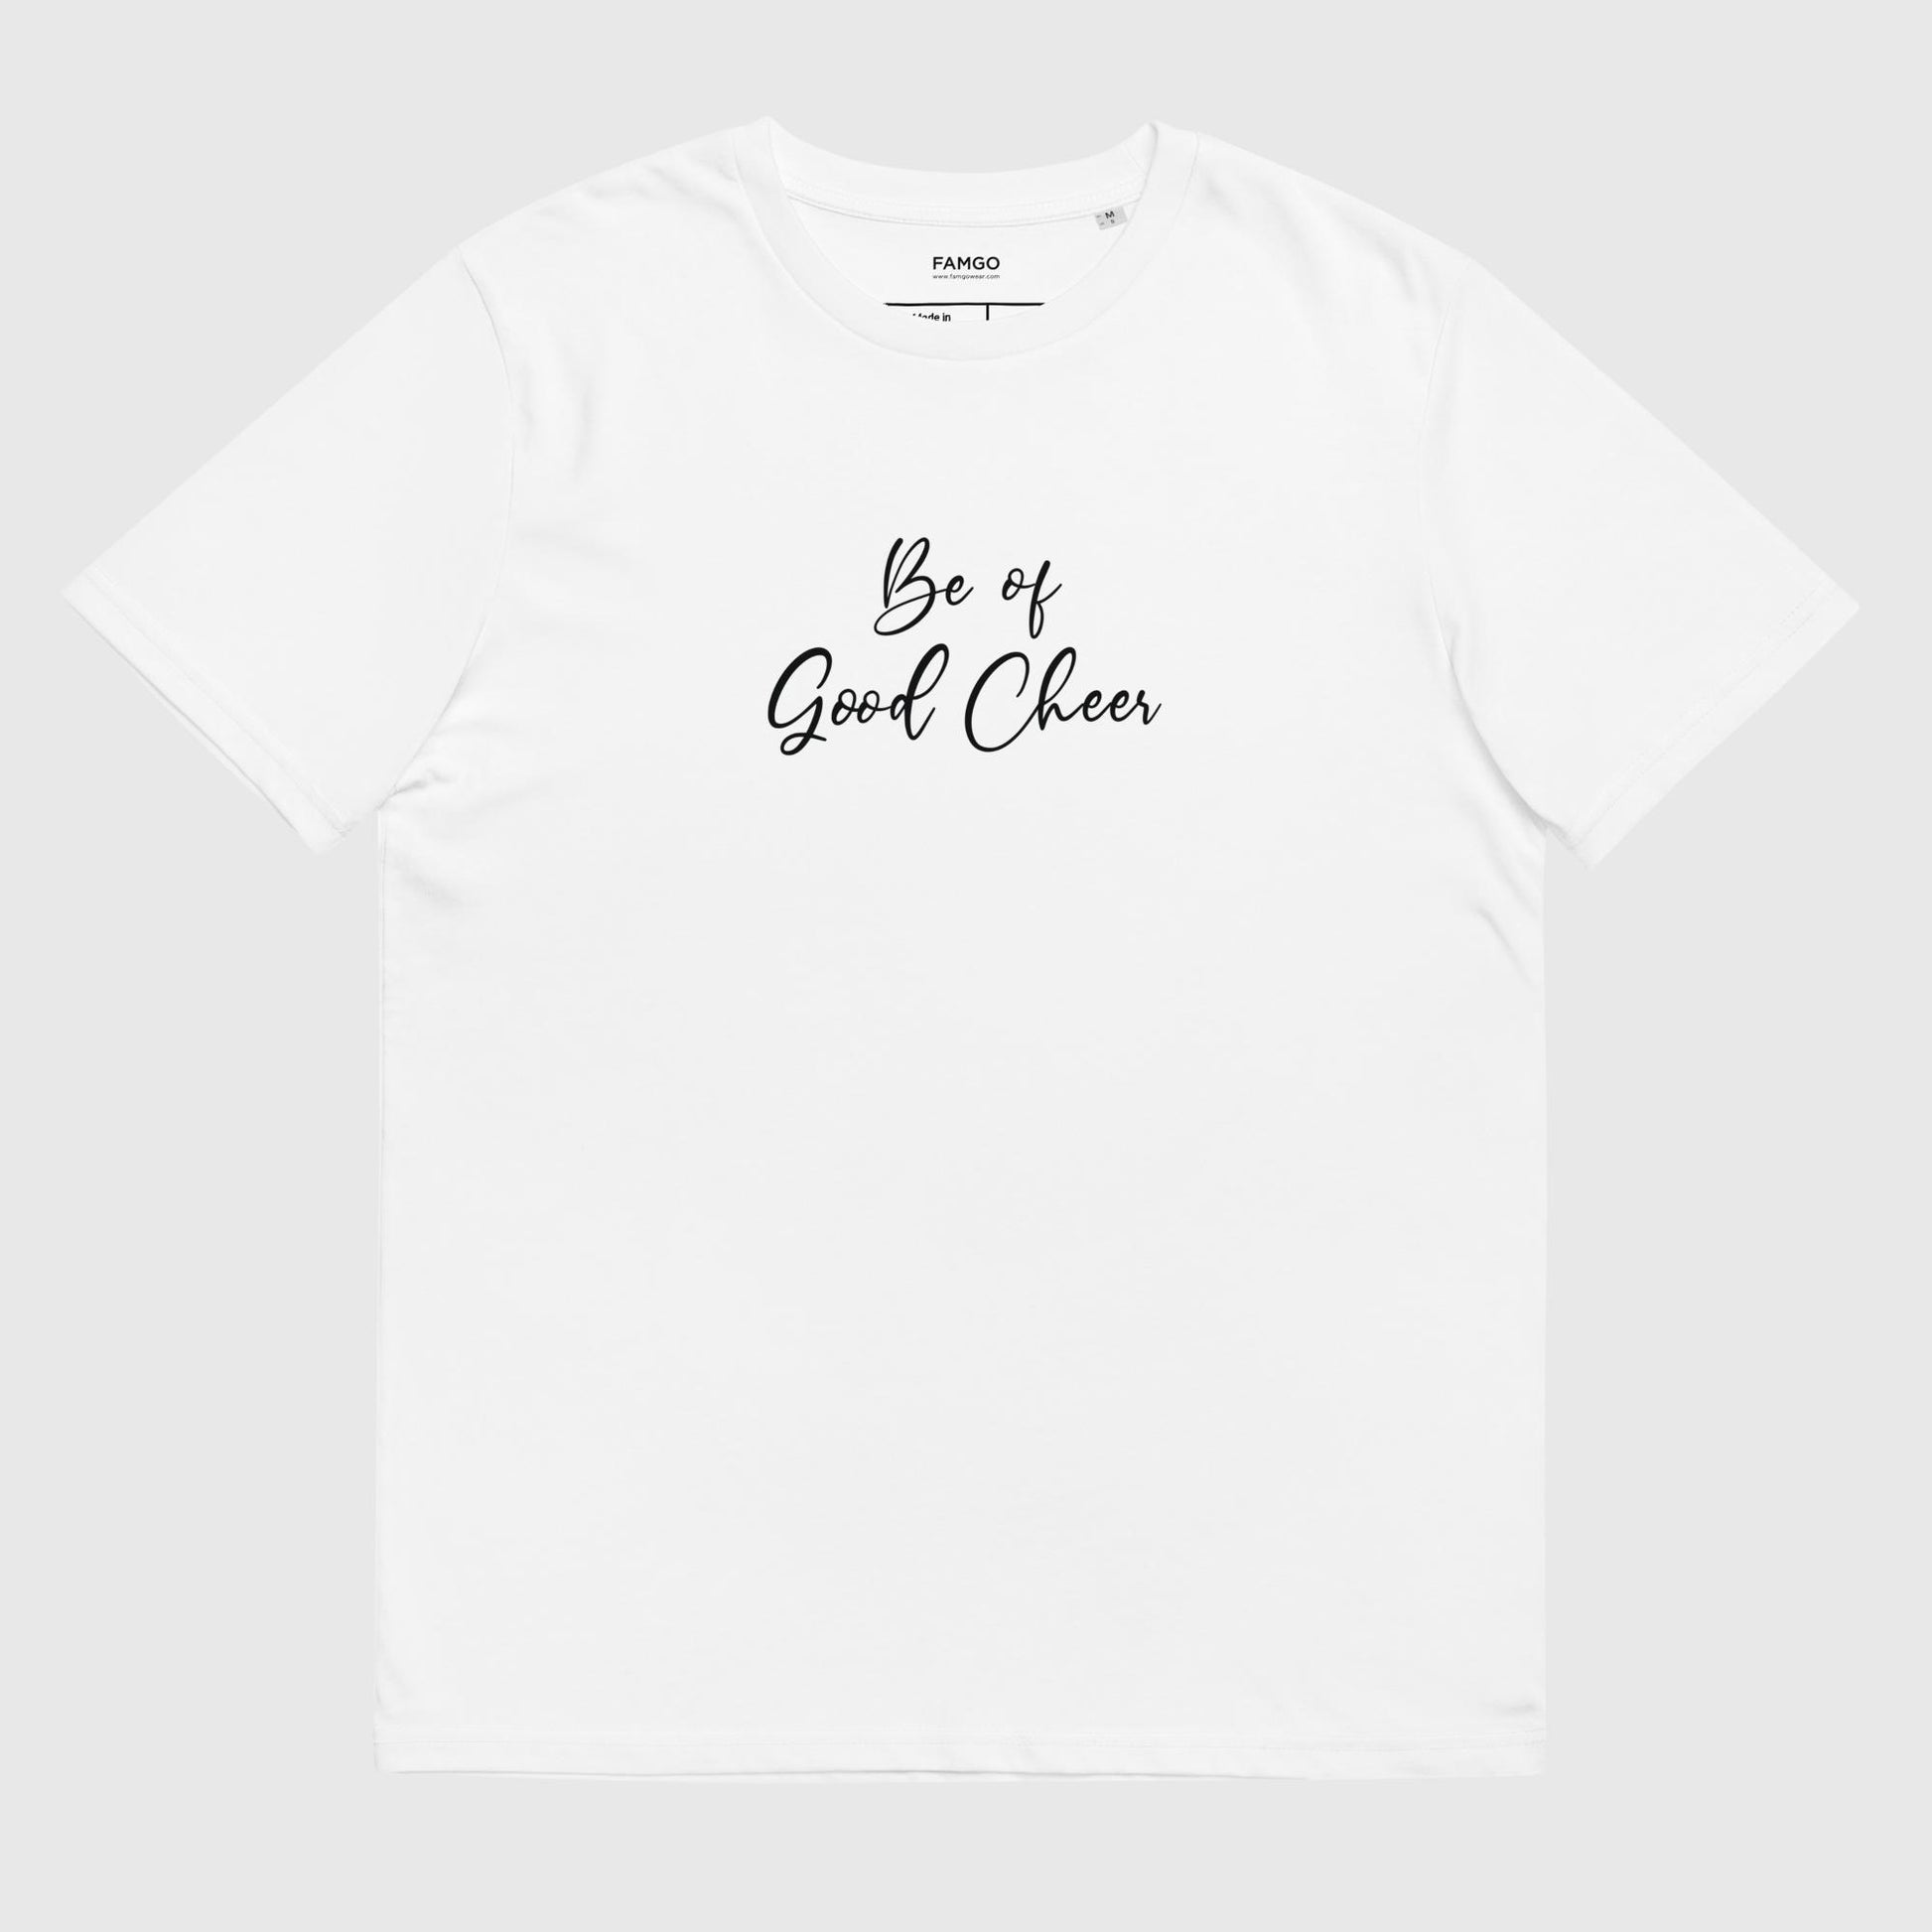 Men's white organic cotton t-shirt that features the positive quote, "Be of Good Cheer."